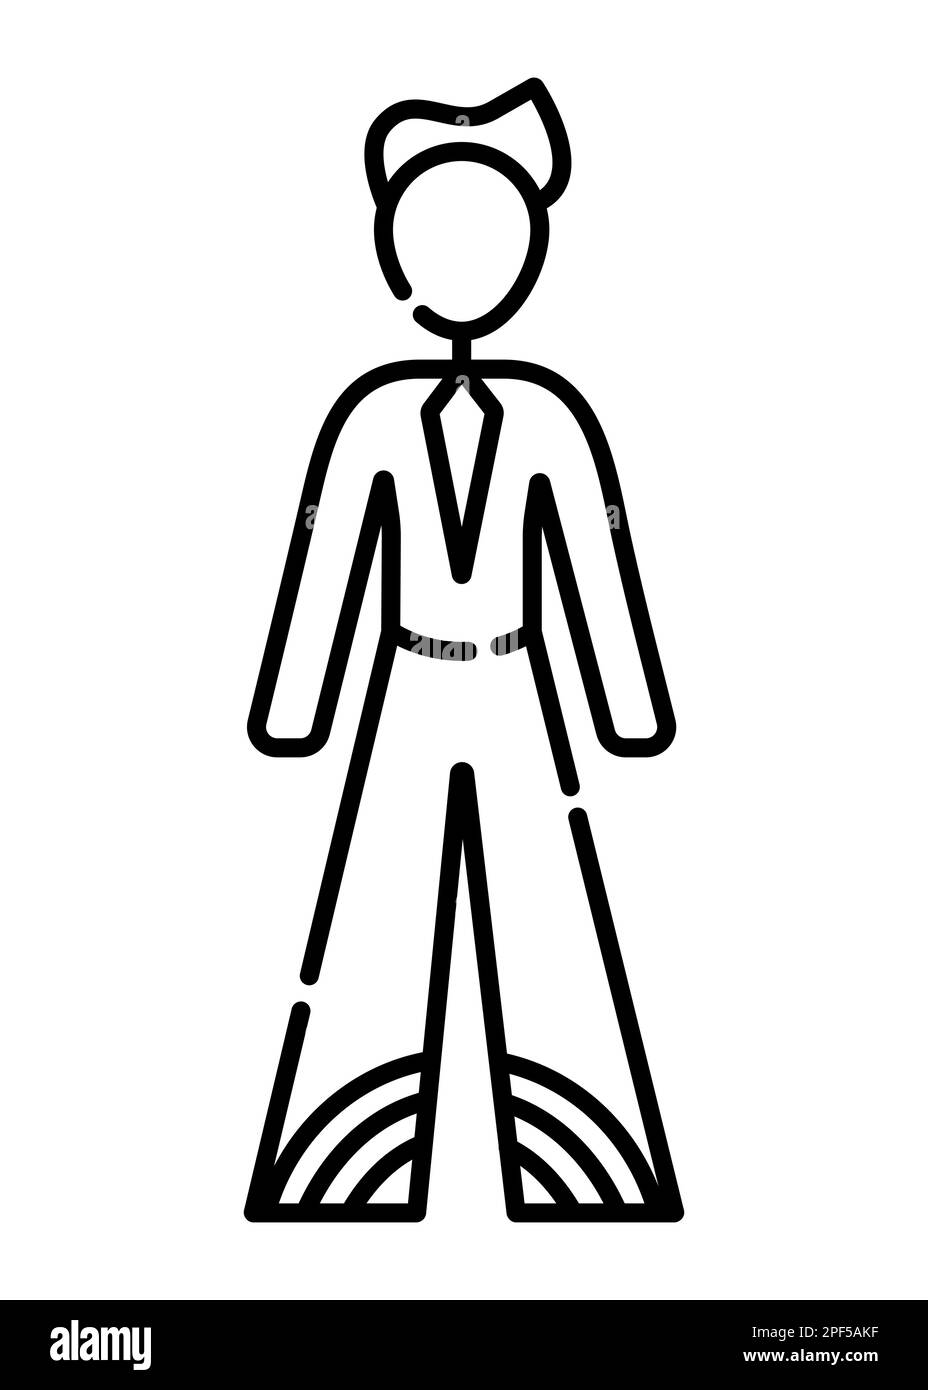 Man in a suit with a tie and a rainbow on his pants, line icon Stock Vector